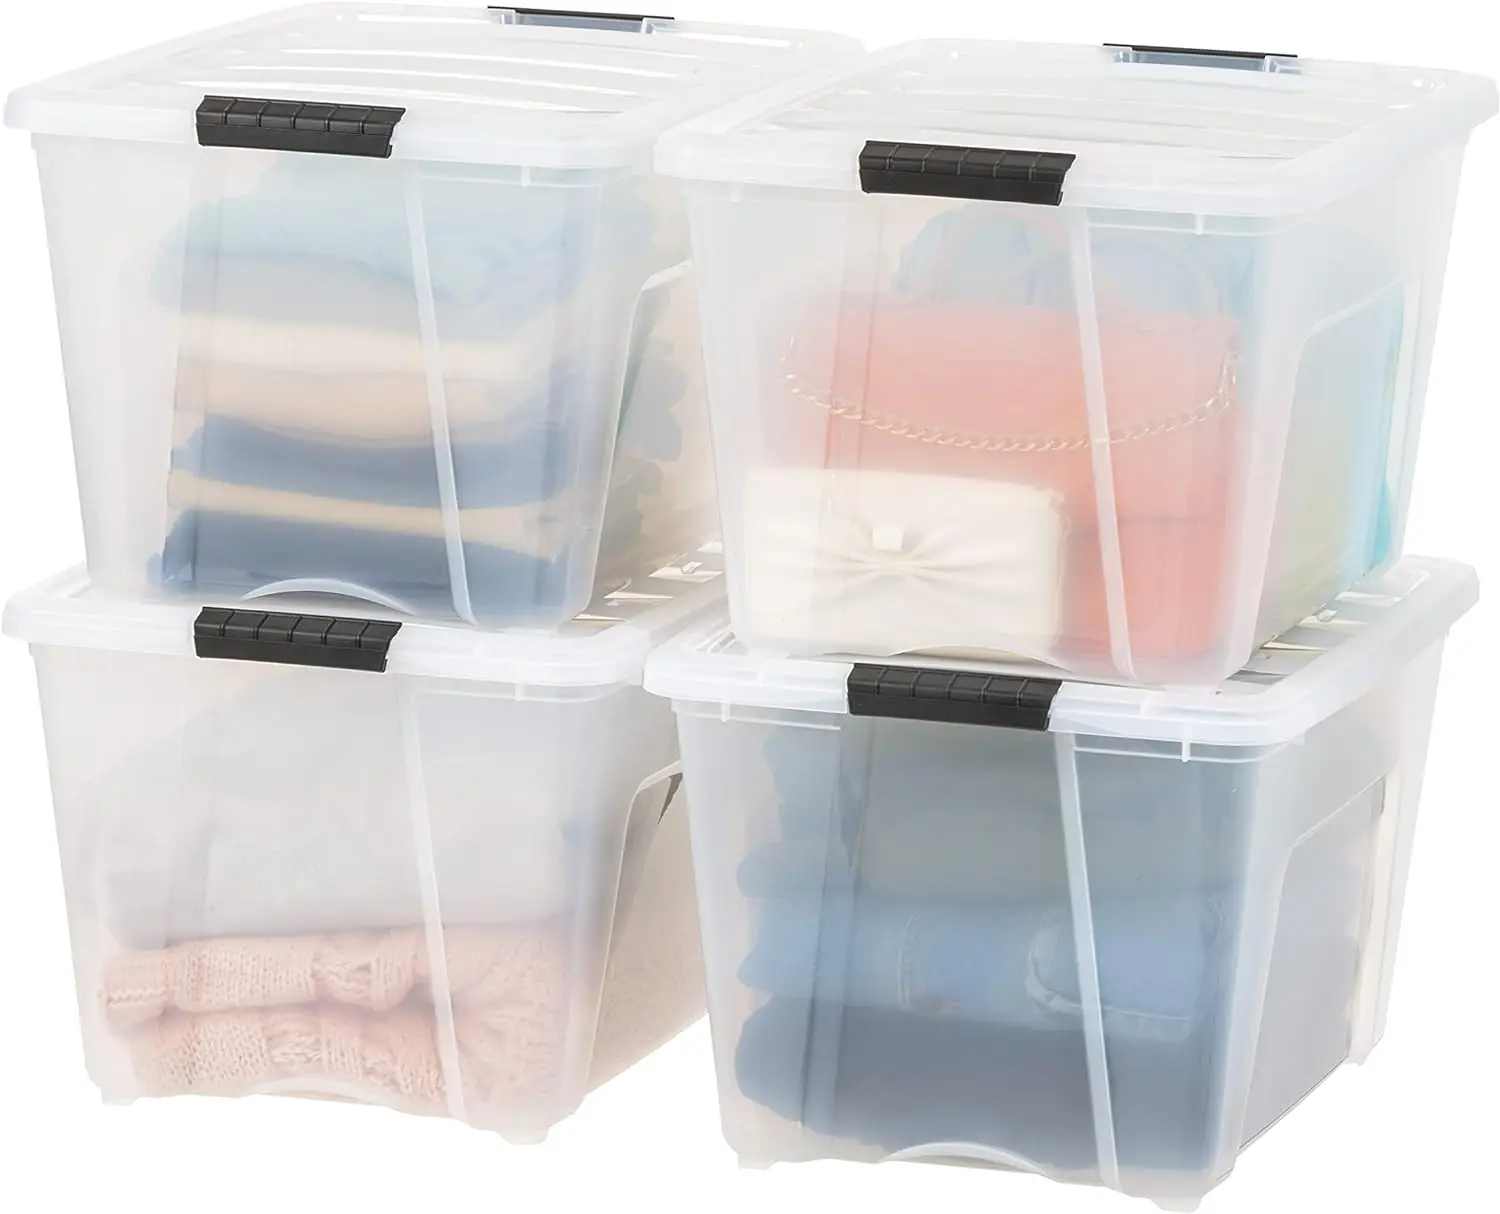 

53 Quart Stackable Plastic Storage Bins with Lids and Latching Buckles, 4 Pack - Clear, Containers with Lids